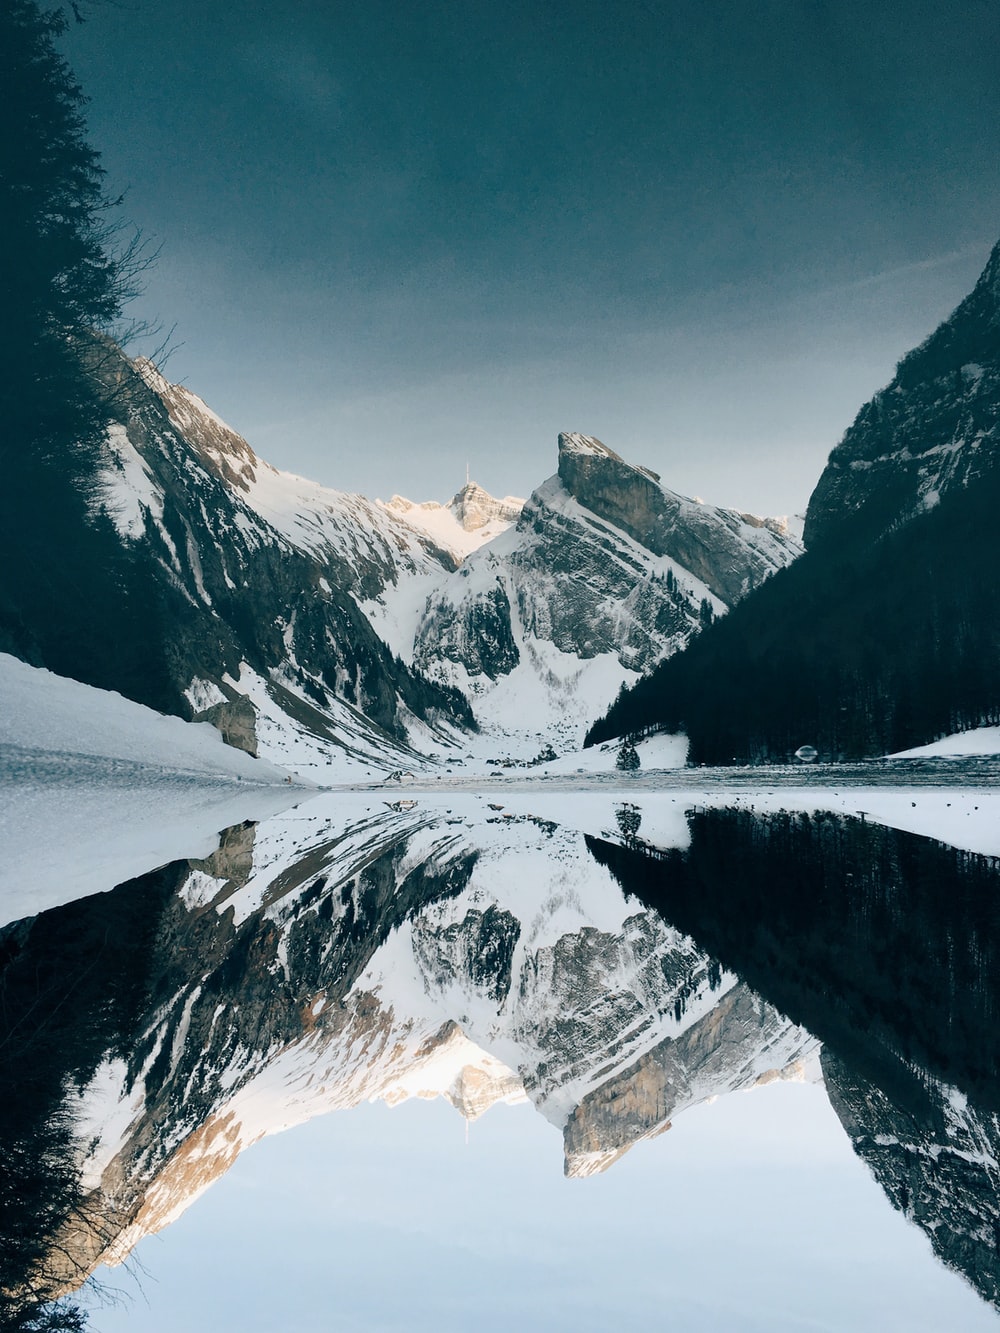 Winter Mountain Picture. Download Free Image